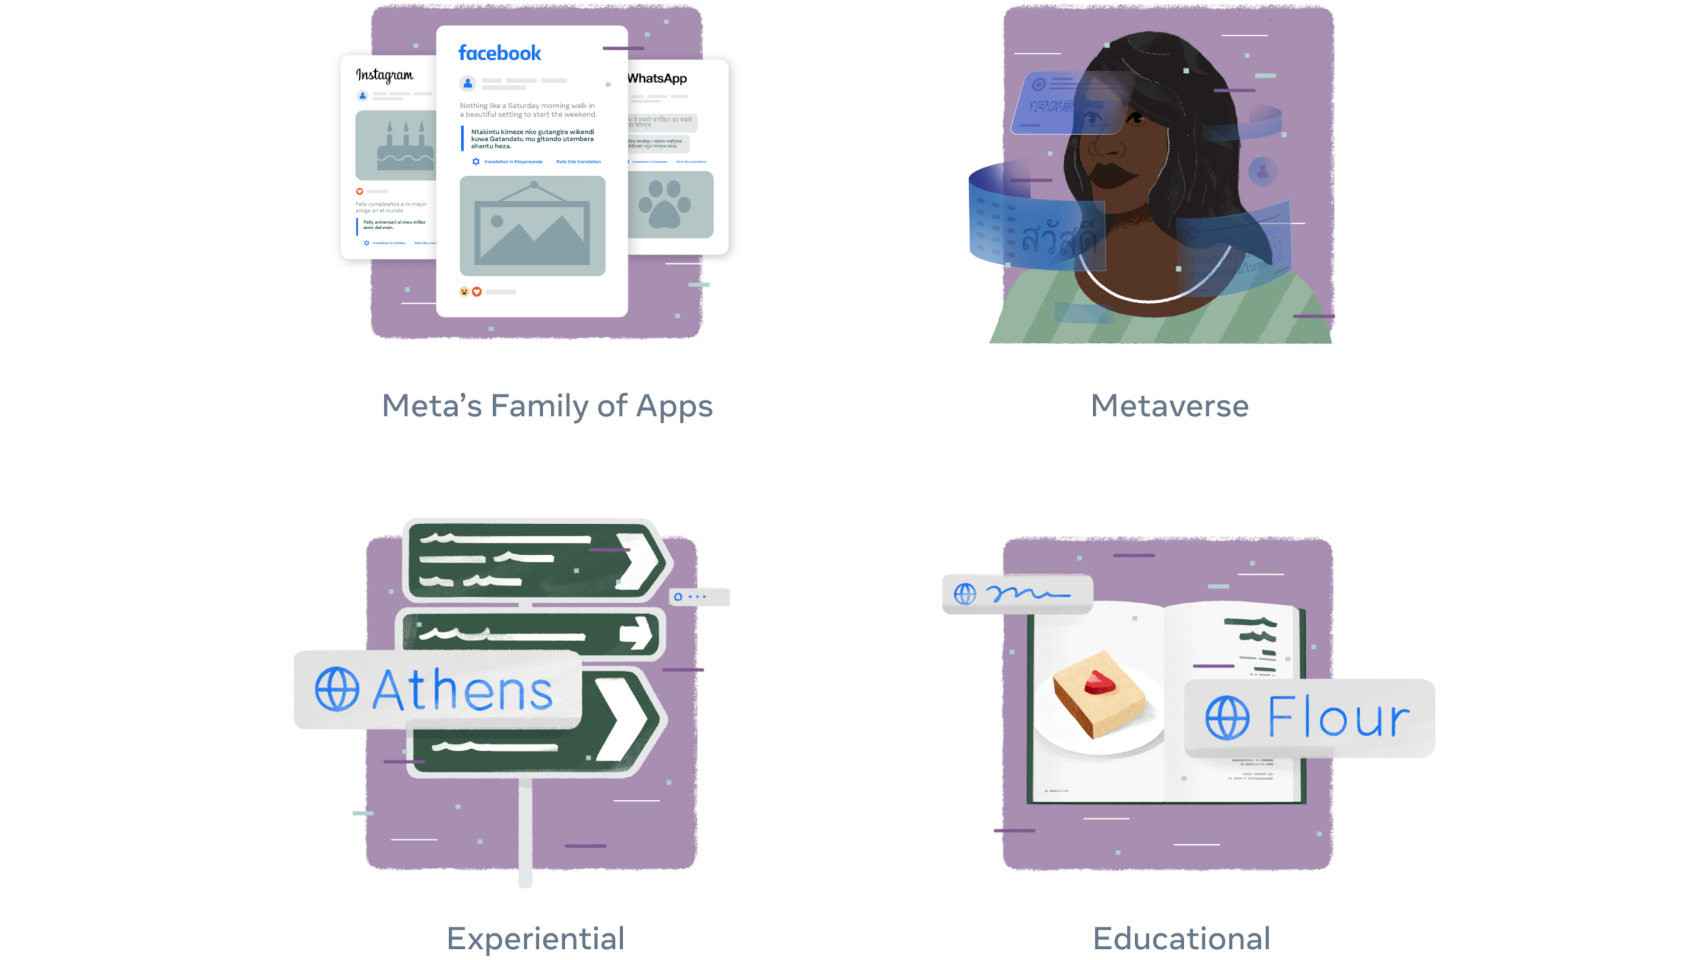 Meta's AI will be integrated into Facebook, WhatsApp and other apps